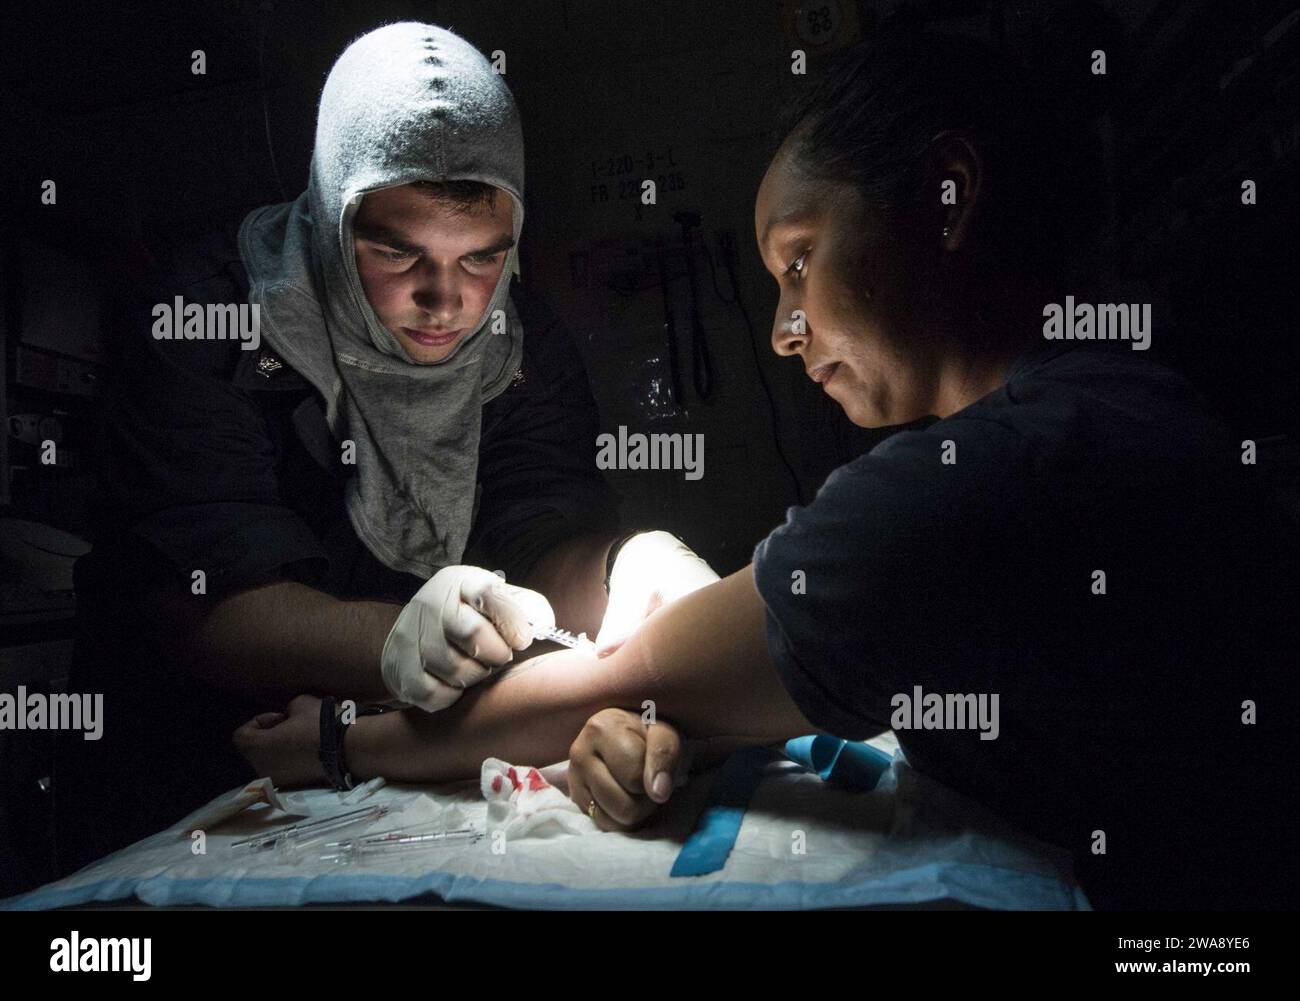 US military forces. 171207KA046-0351  MEDITERRANEAN SEA (Dec. 7, 2017) - Hospital Corpsman 3rd Class Daniel Heaps inserts an intravenous line into the arm of Logistics Specialist 2nd Class Alina Vasquez for medical training during a general quarters drill aboard the Arleigh Burke-class guided-missile destroyer USS Carney (DDG 64), Dec. 7, 2017. Carney, forward-deployed to Rota, Spain, is on its fourth patrol in the U.S. 6th Fleet area of operations in support of regional allies and partners, and U.S. national security interests in Europe. (U.S. Navy photo by Mass Communication Specialist 2nd C Stock Photo